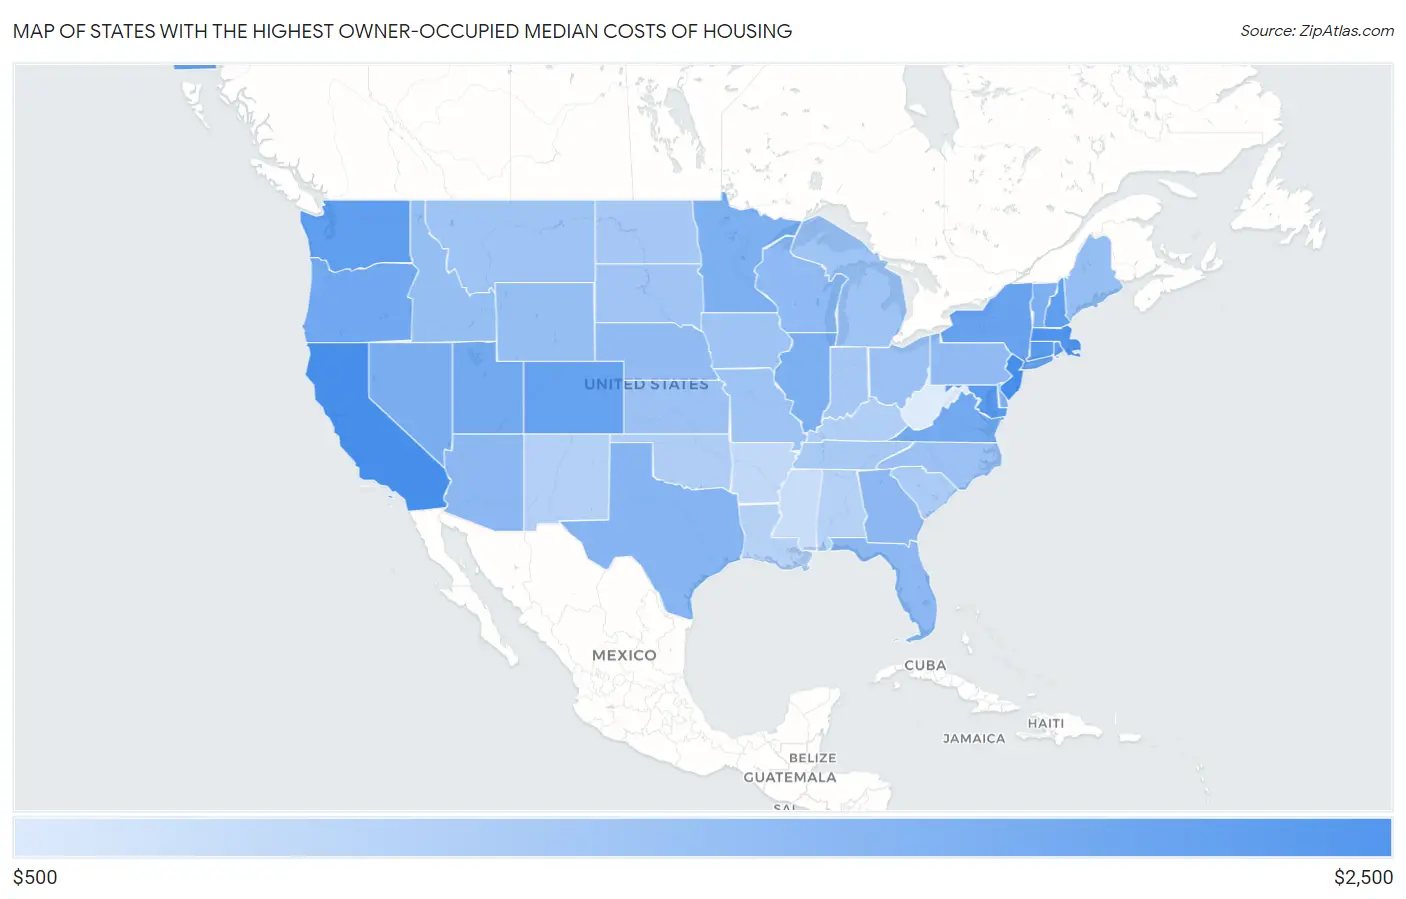 States with the Highest Owner-Occupied Median Costs of Housing in the United States Map